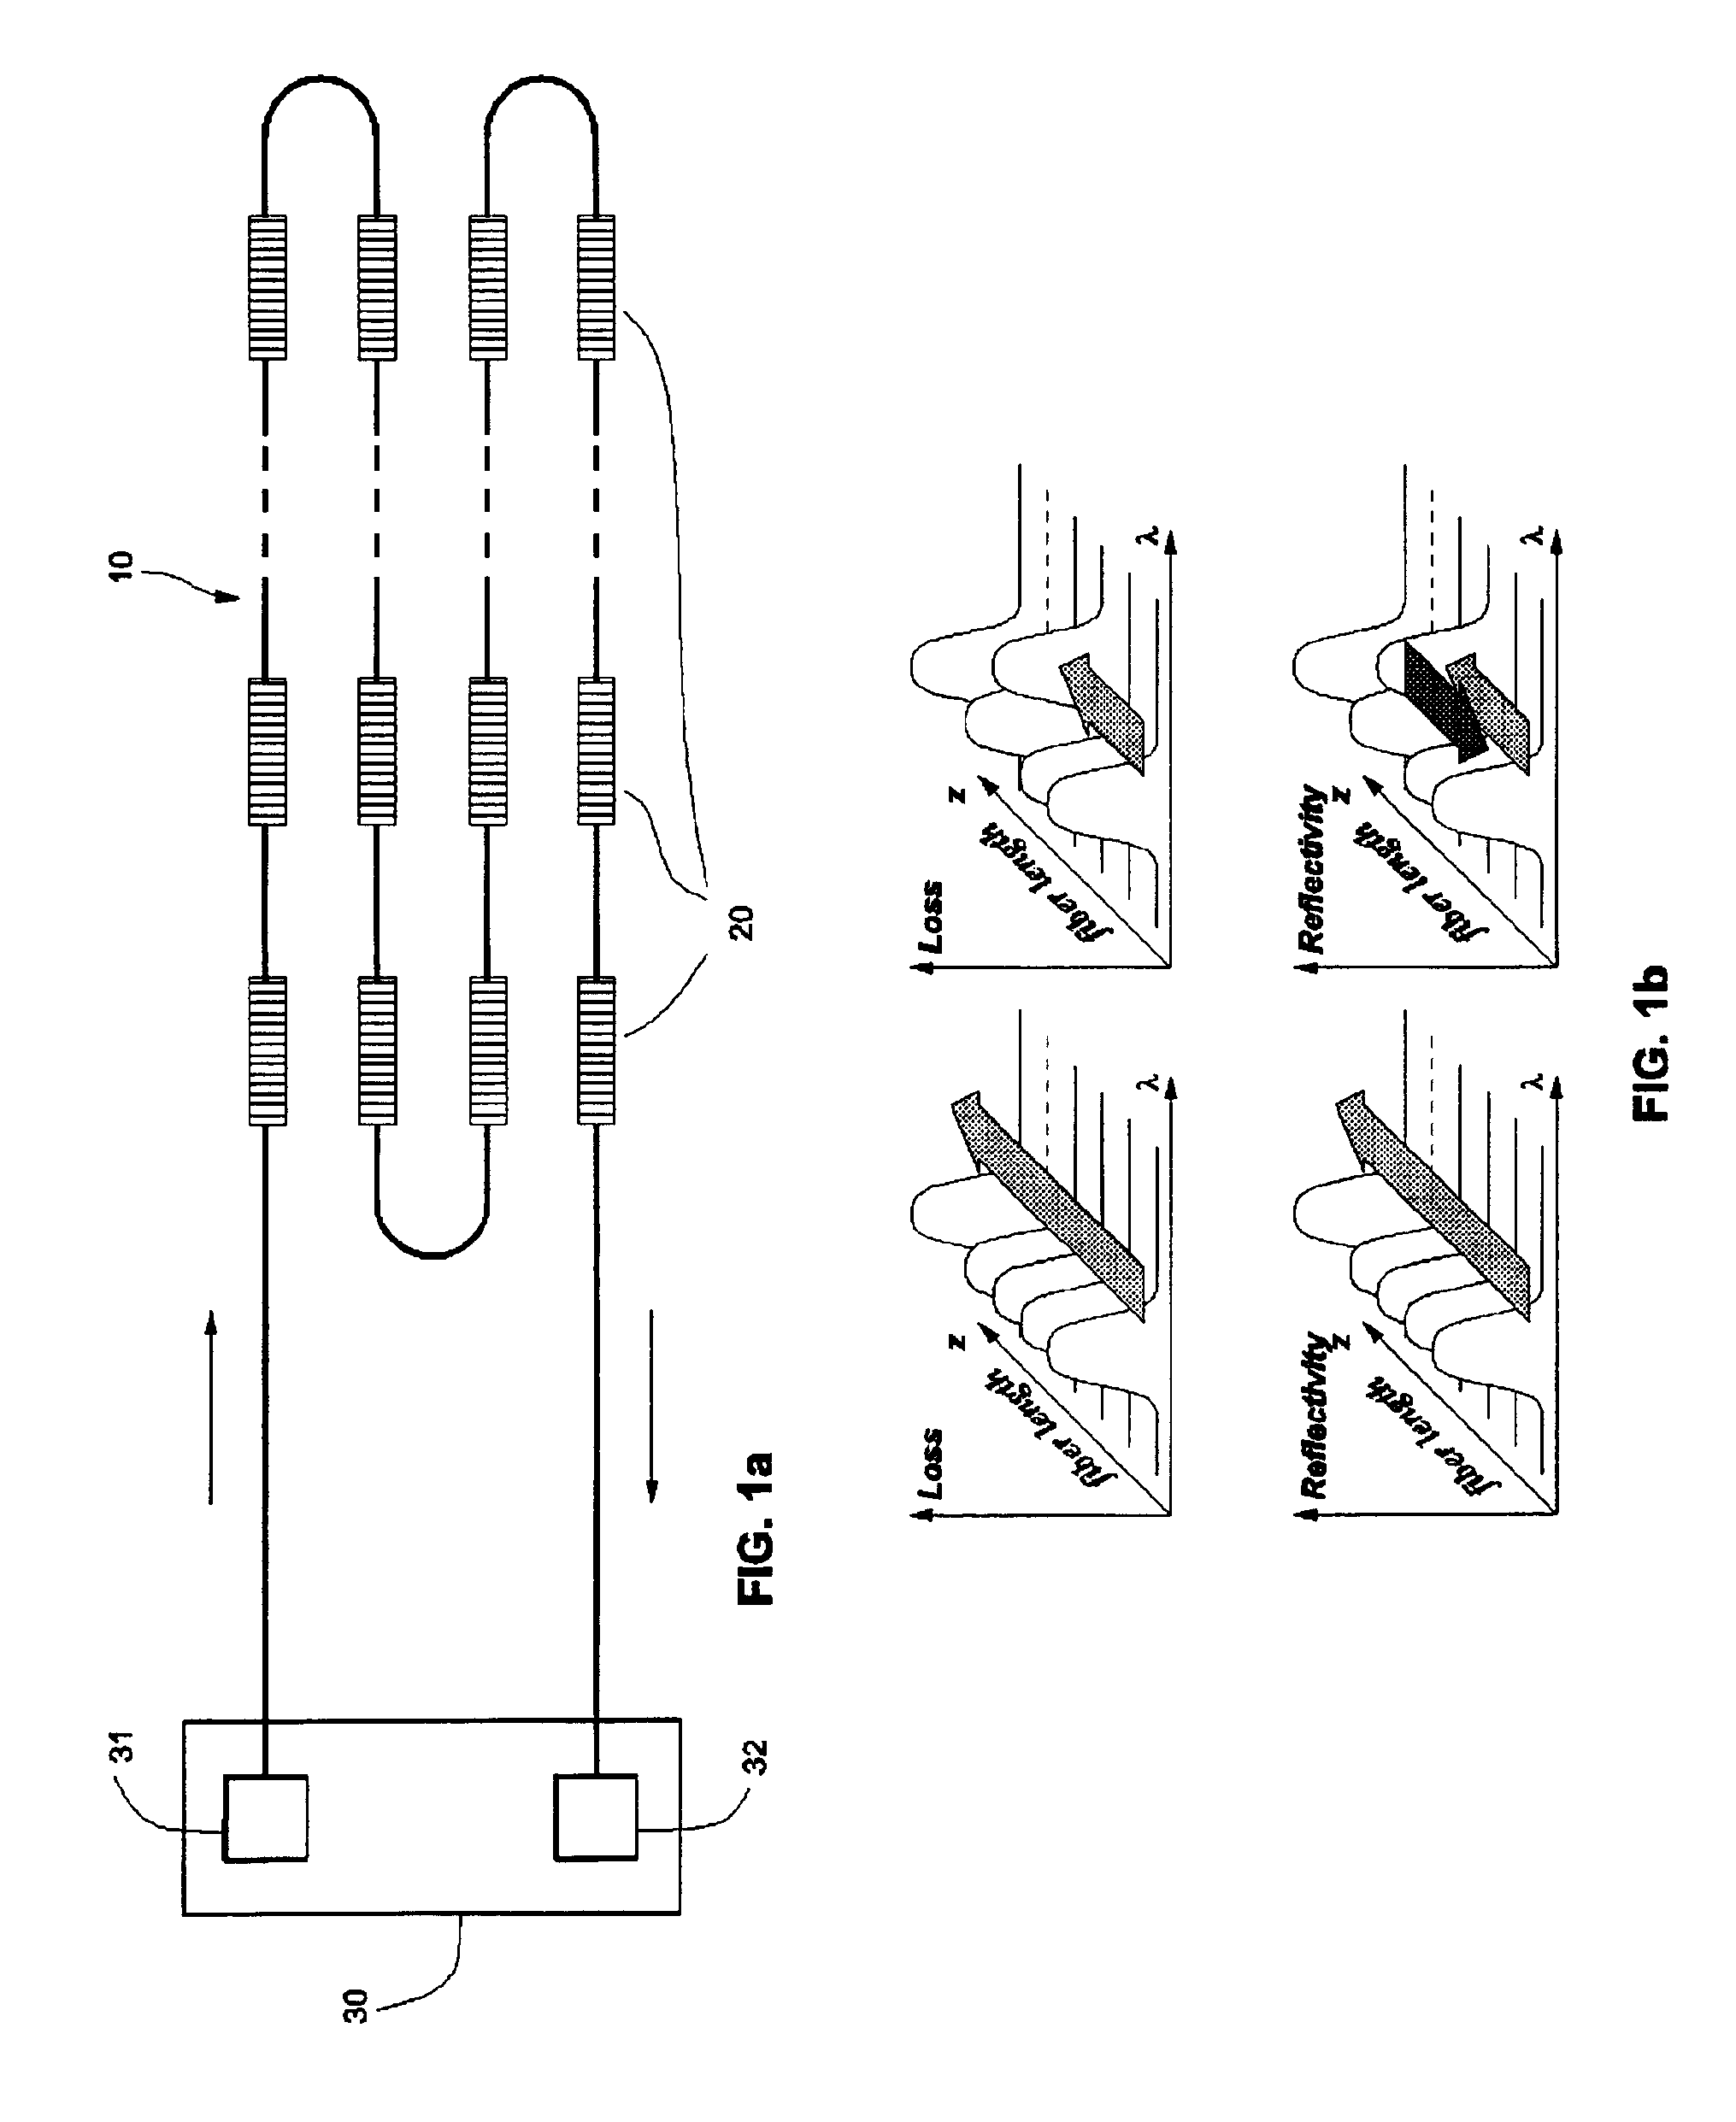 Fiber-optic sensing system for distributed detection and localization of alarm conditions